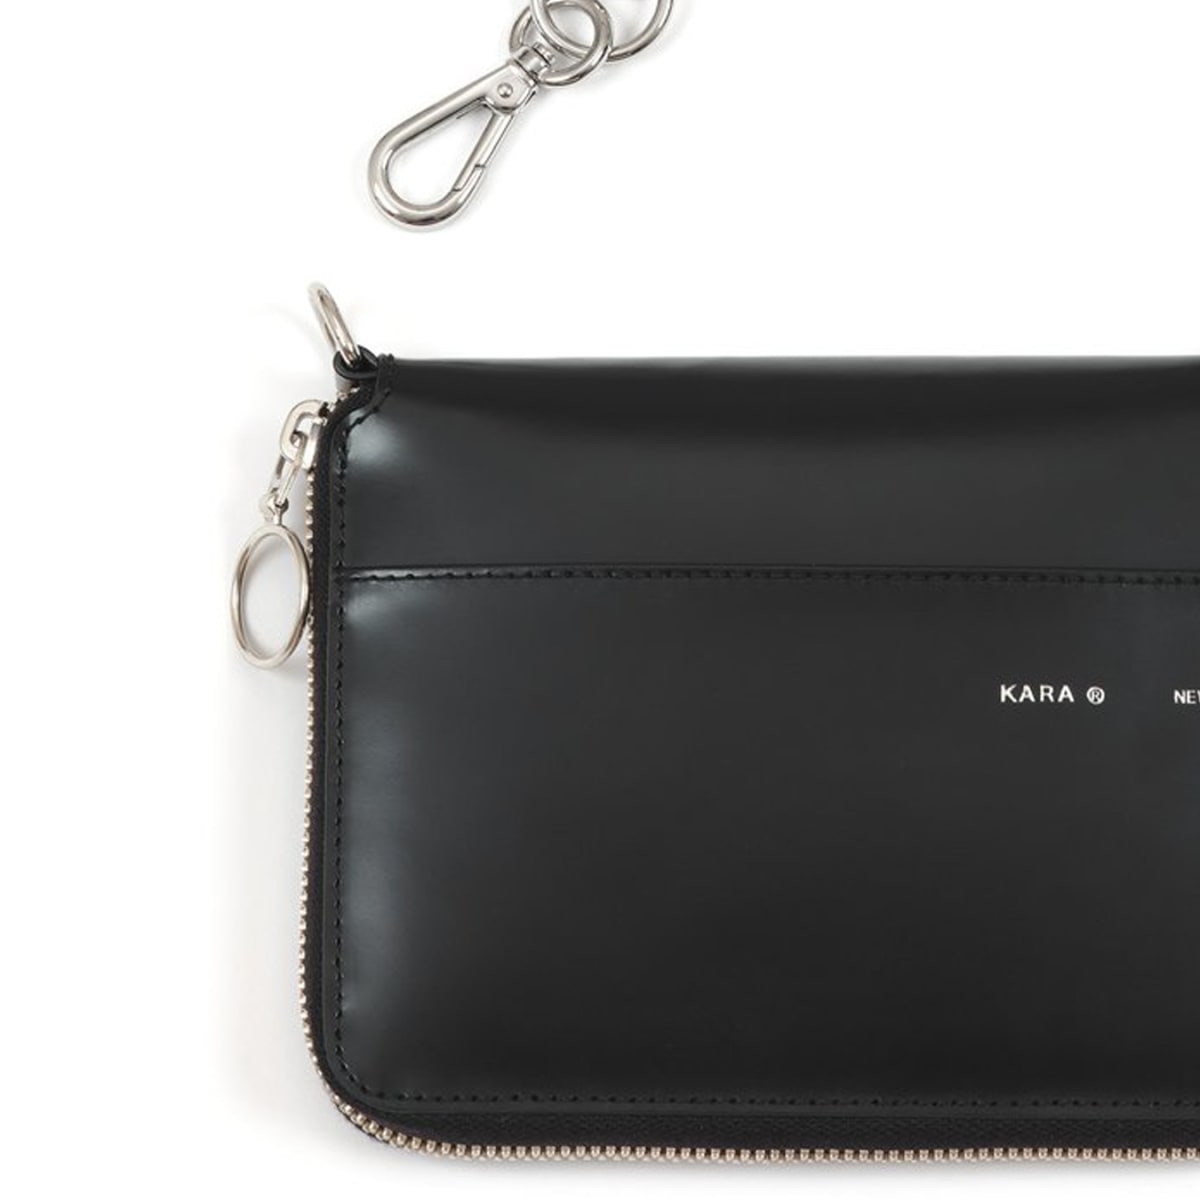 Maria Wants to Swap Her Fanny Pack for This 'Bike Wallet